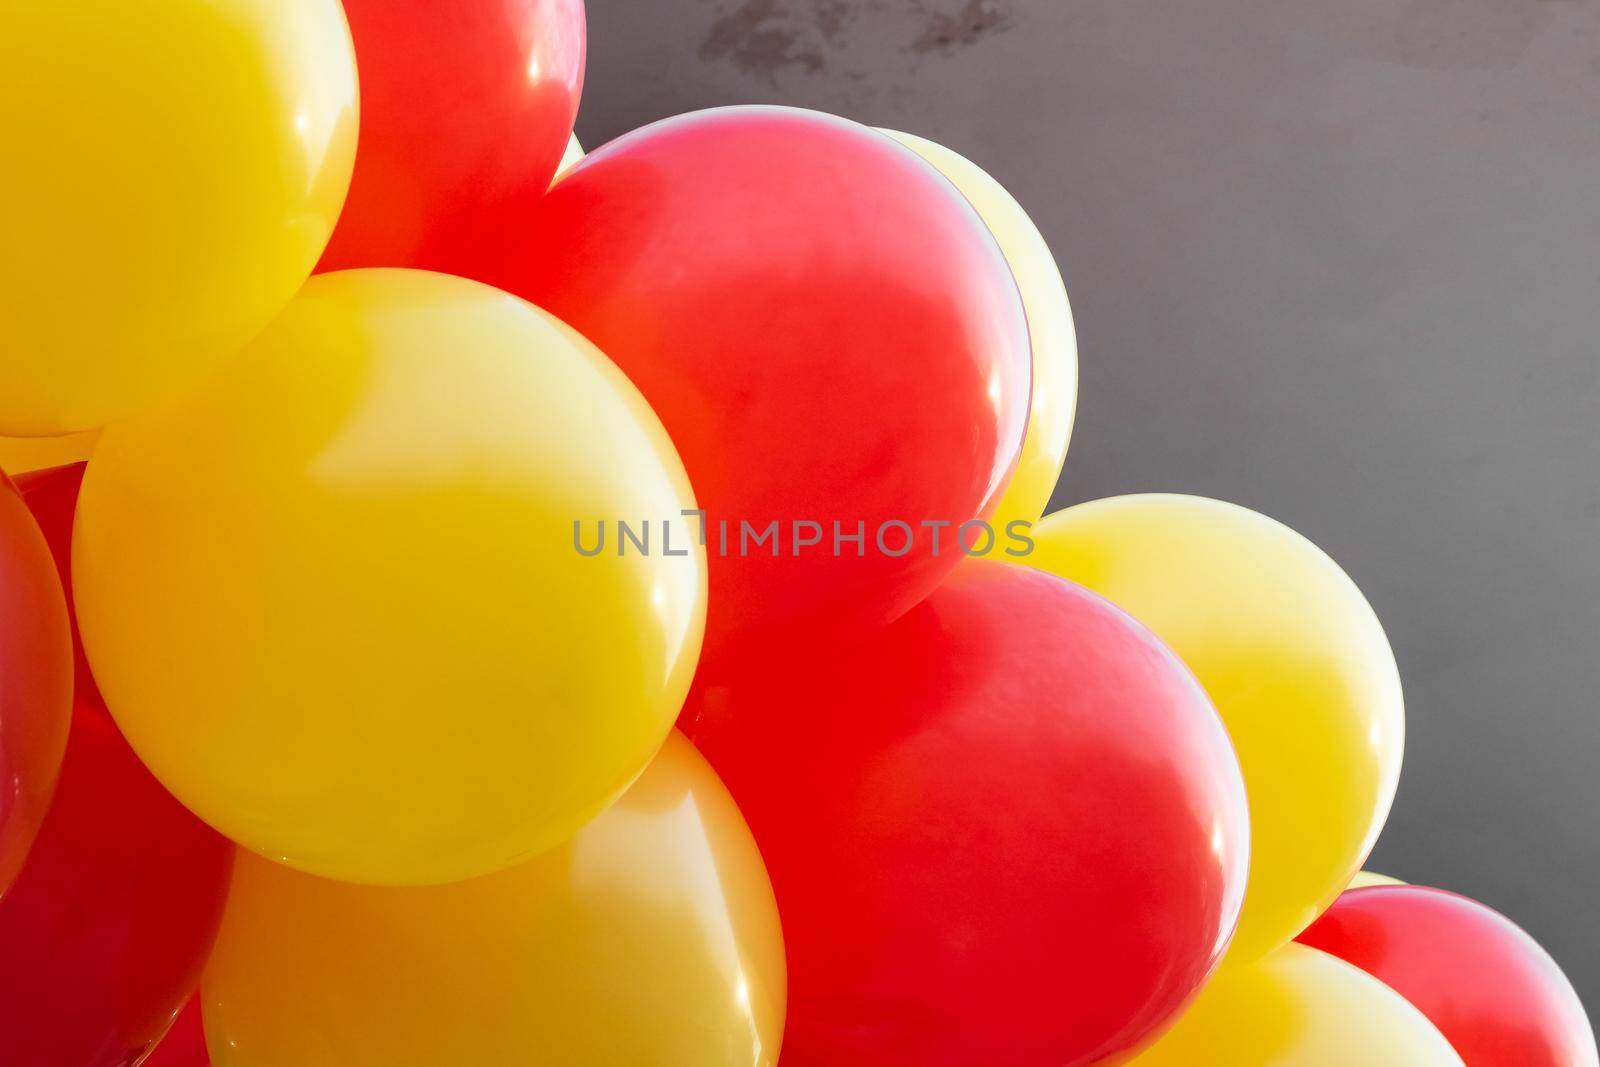 Yellow and red balloons on the building close up